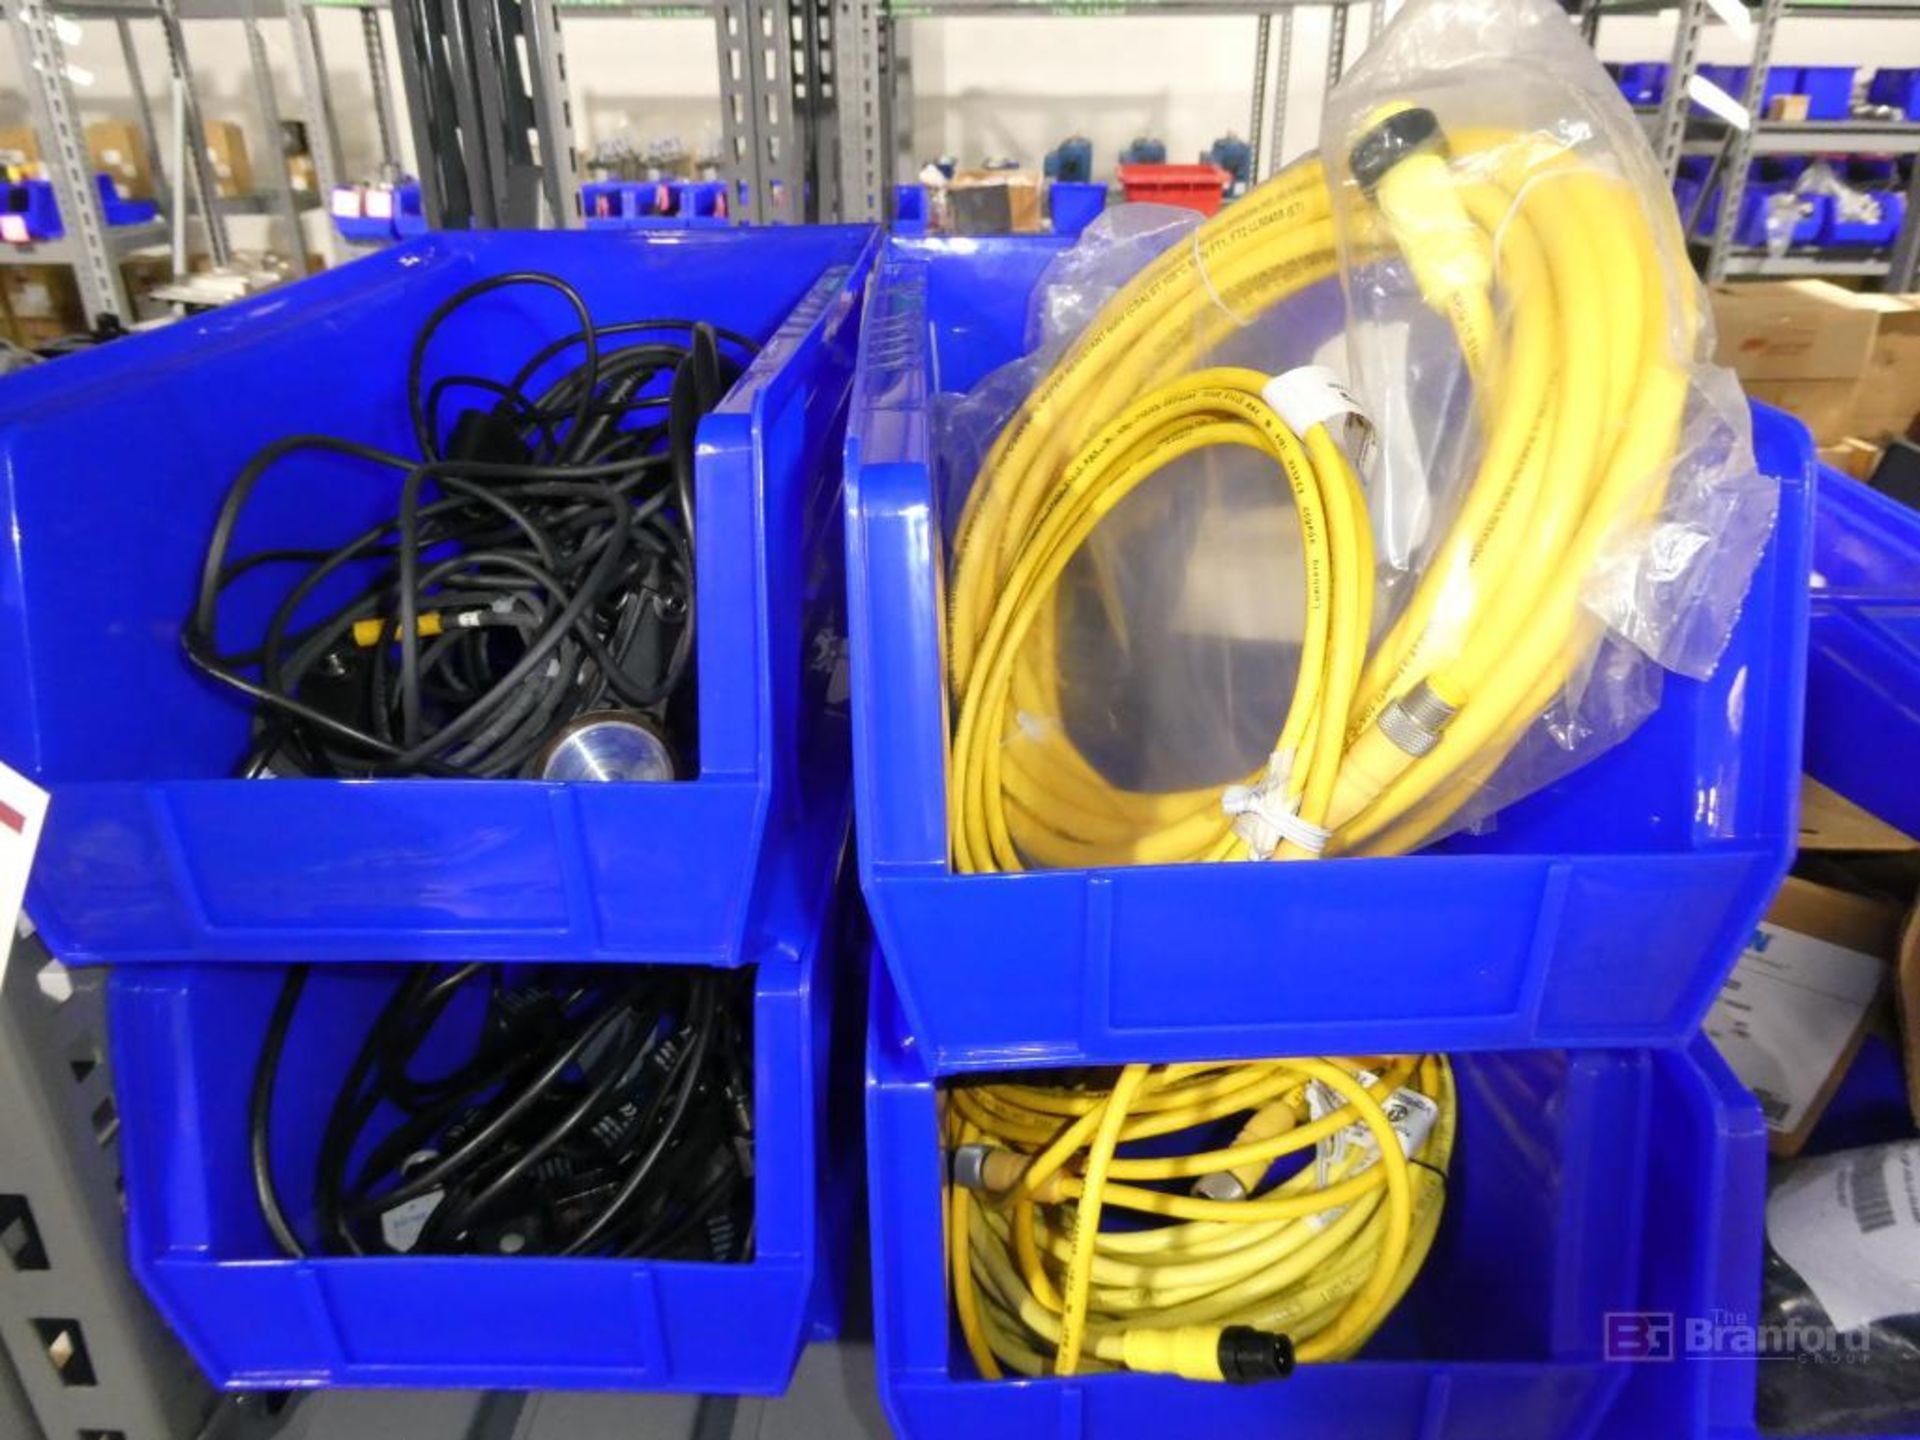 Pallet of misc electrical wiring and cables - Image 21 of 38